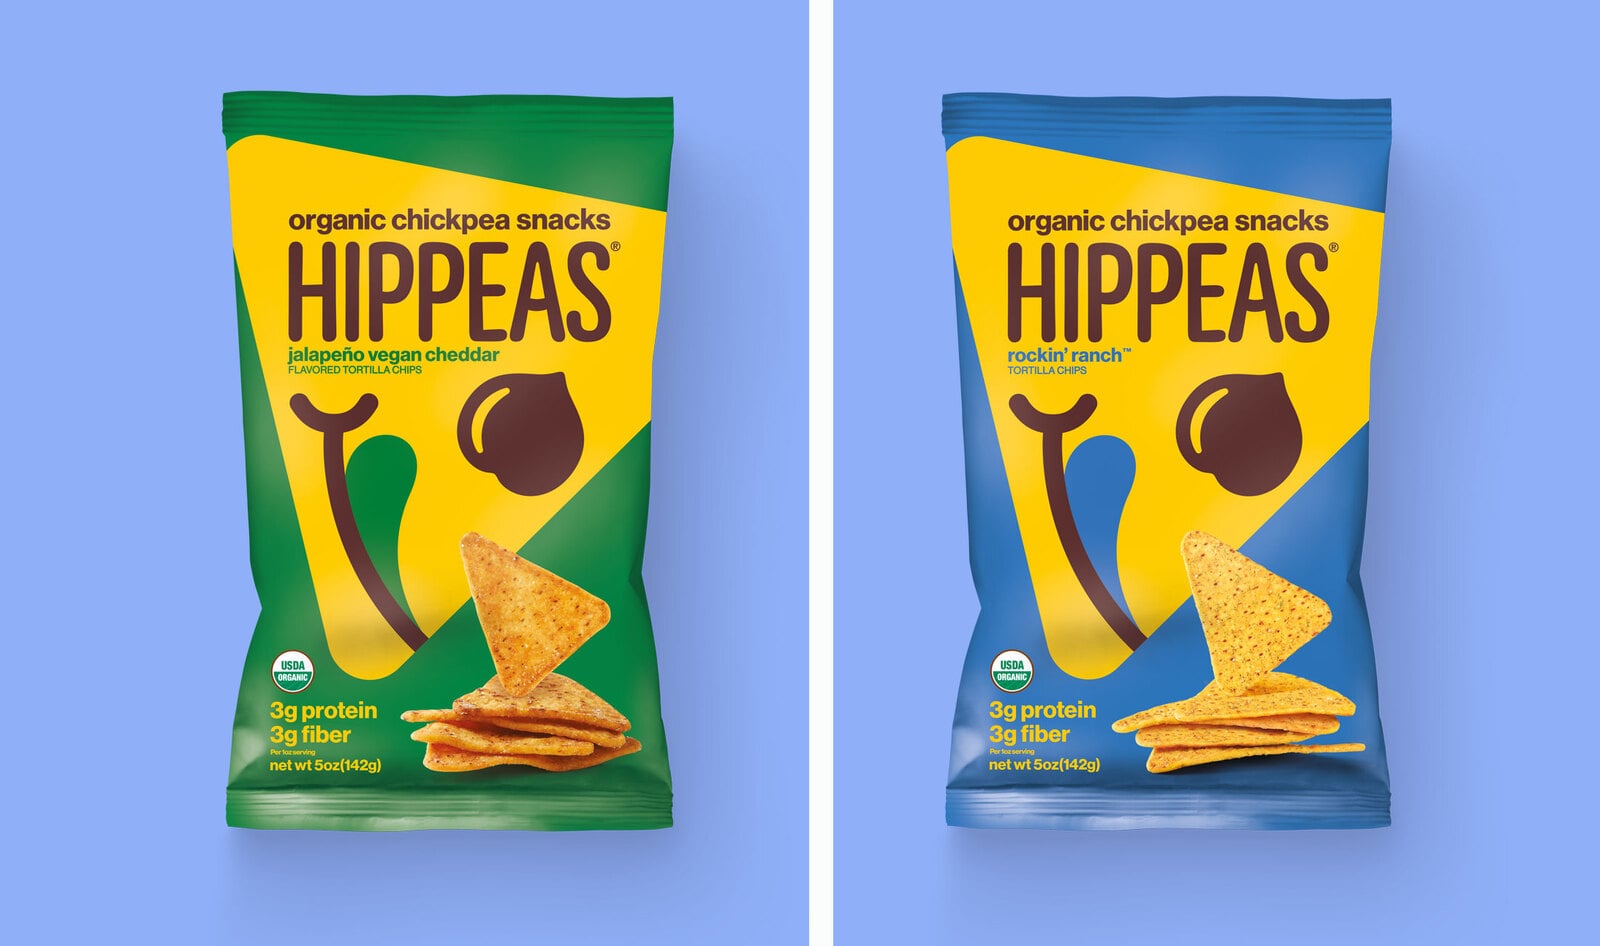 Vegan Jalapeño Cheddar and Ranch Tortilla Chips Launch at Whole Foods